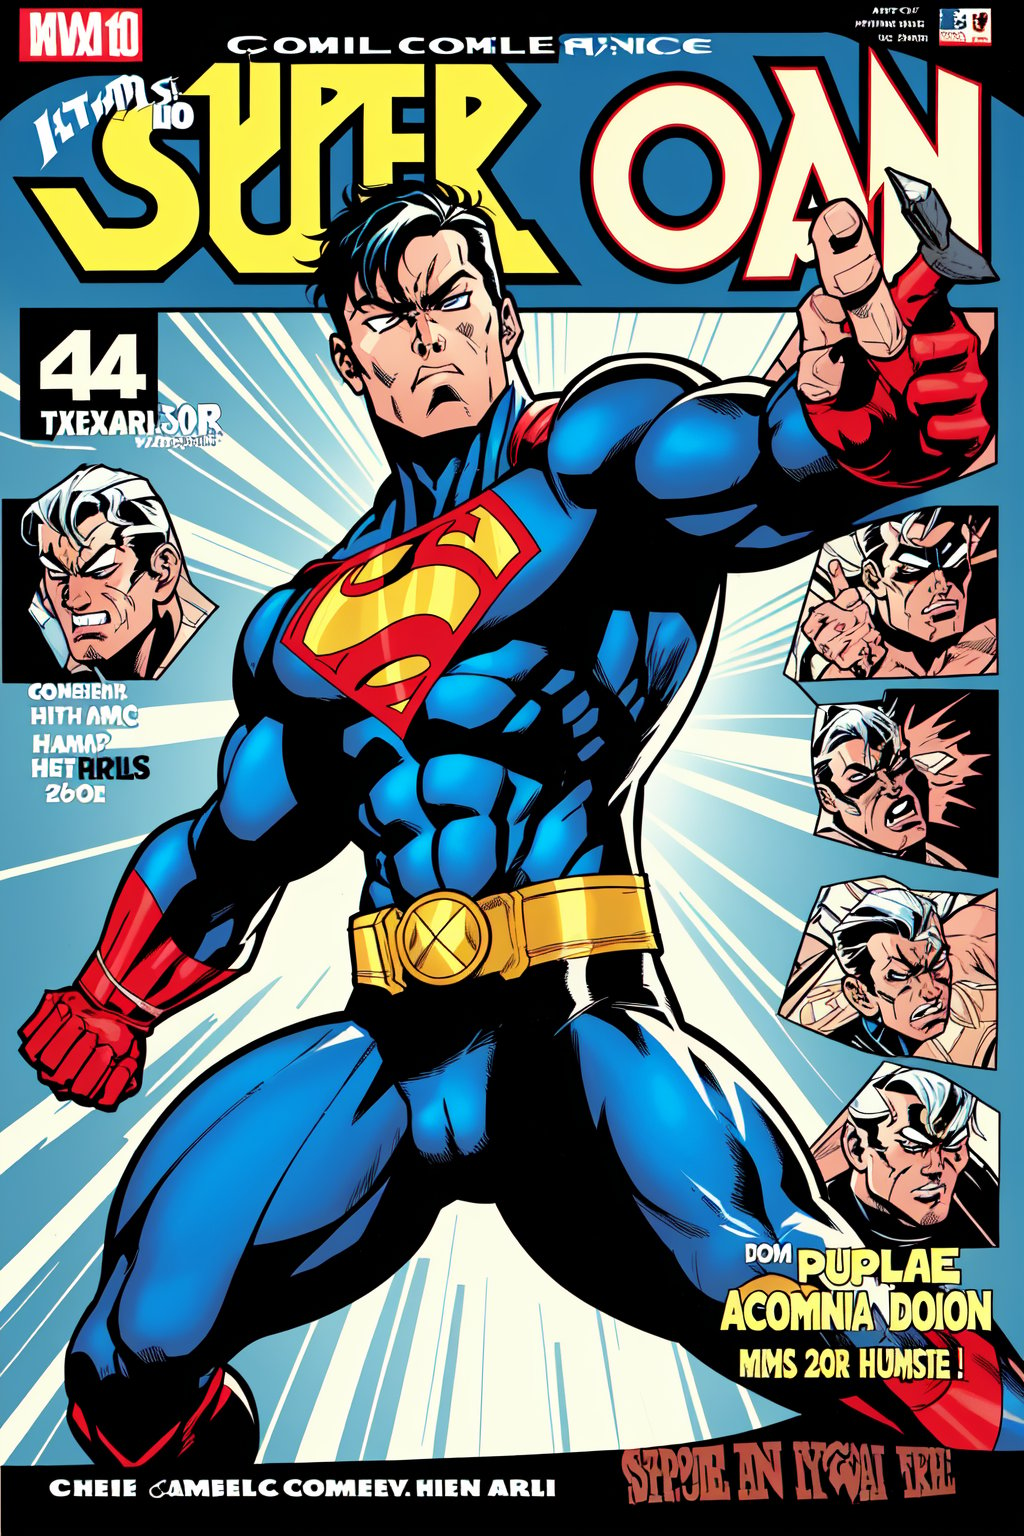 a comic cover of a super hero in a action pose in comic style